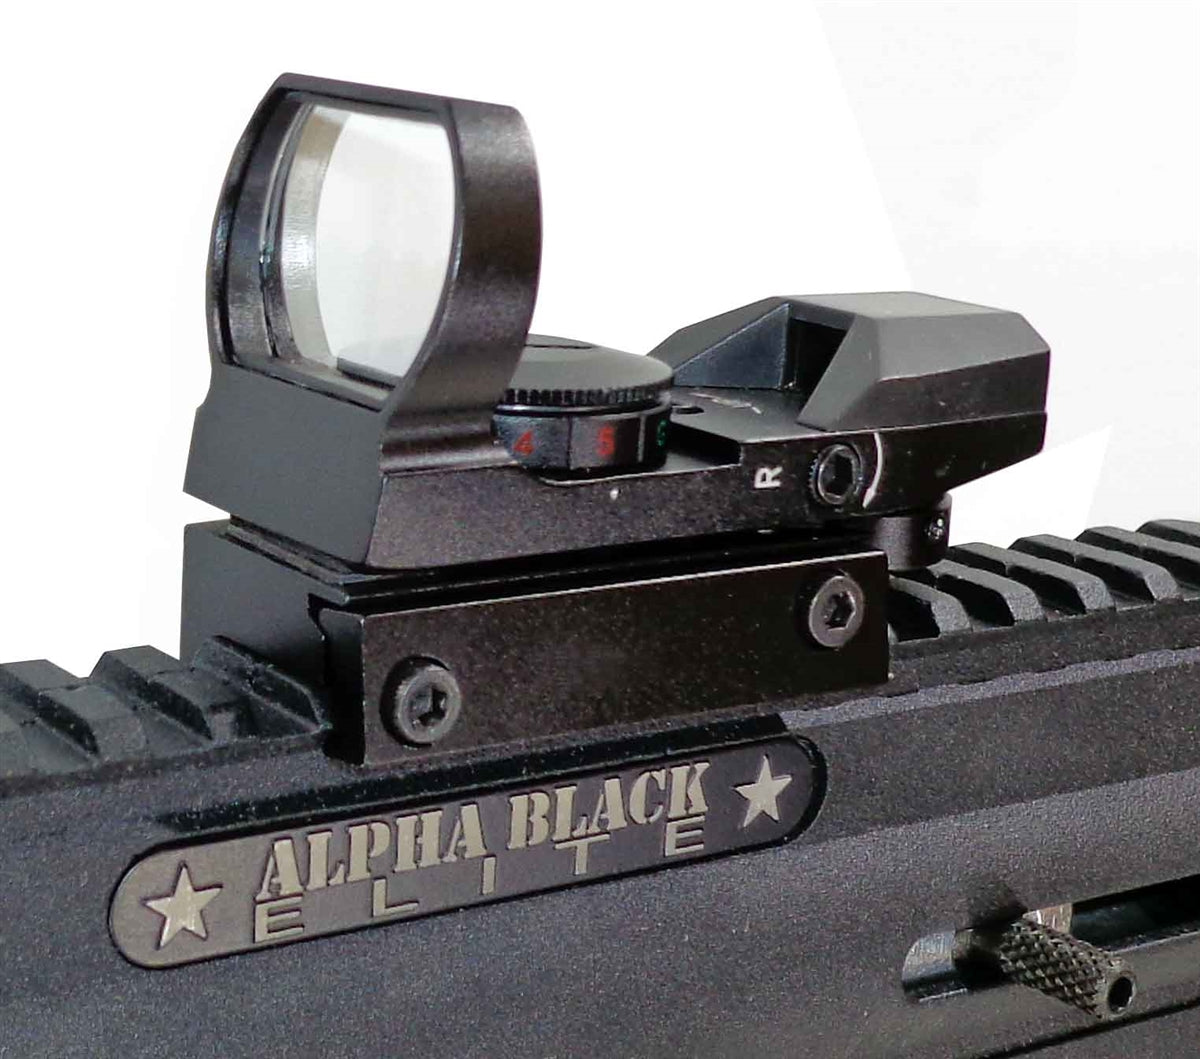 Trinity reflex sight with 4 reticles red green for Tippmann Bravo One paintball guns. - TRINITY PAINTBALL